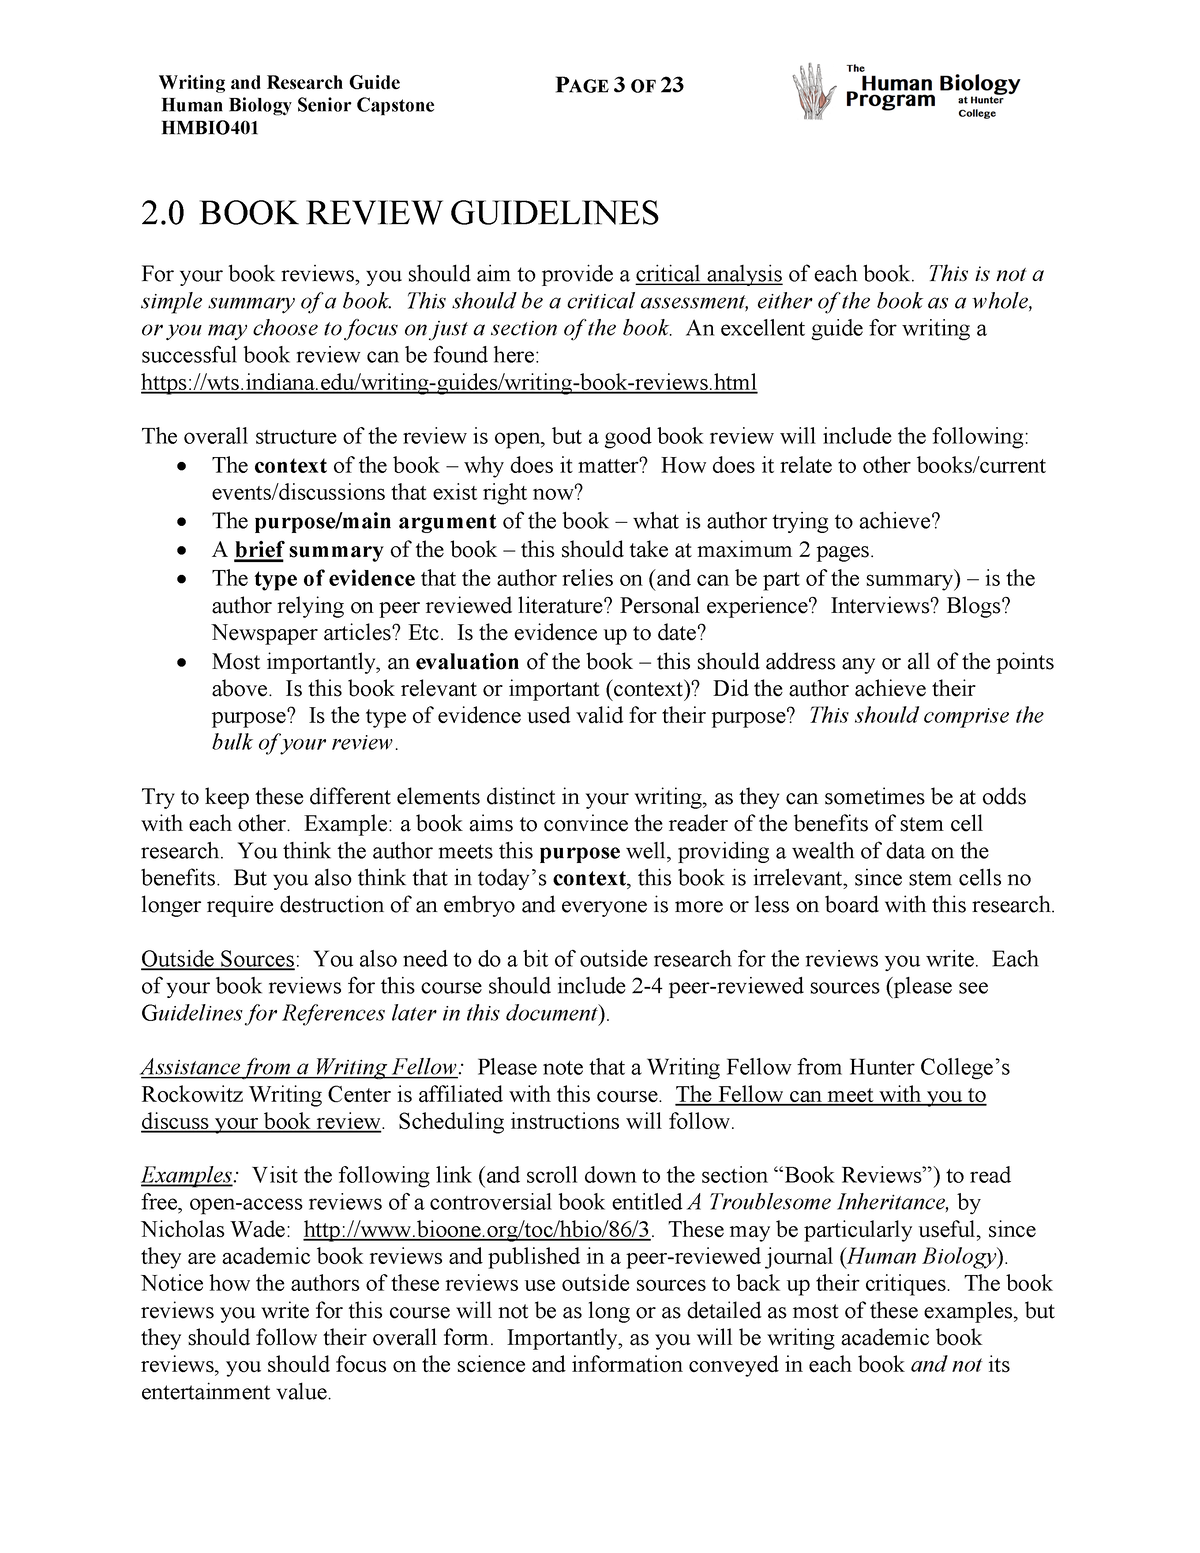 how to write a book summary college